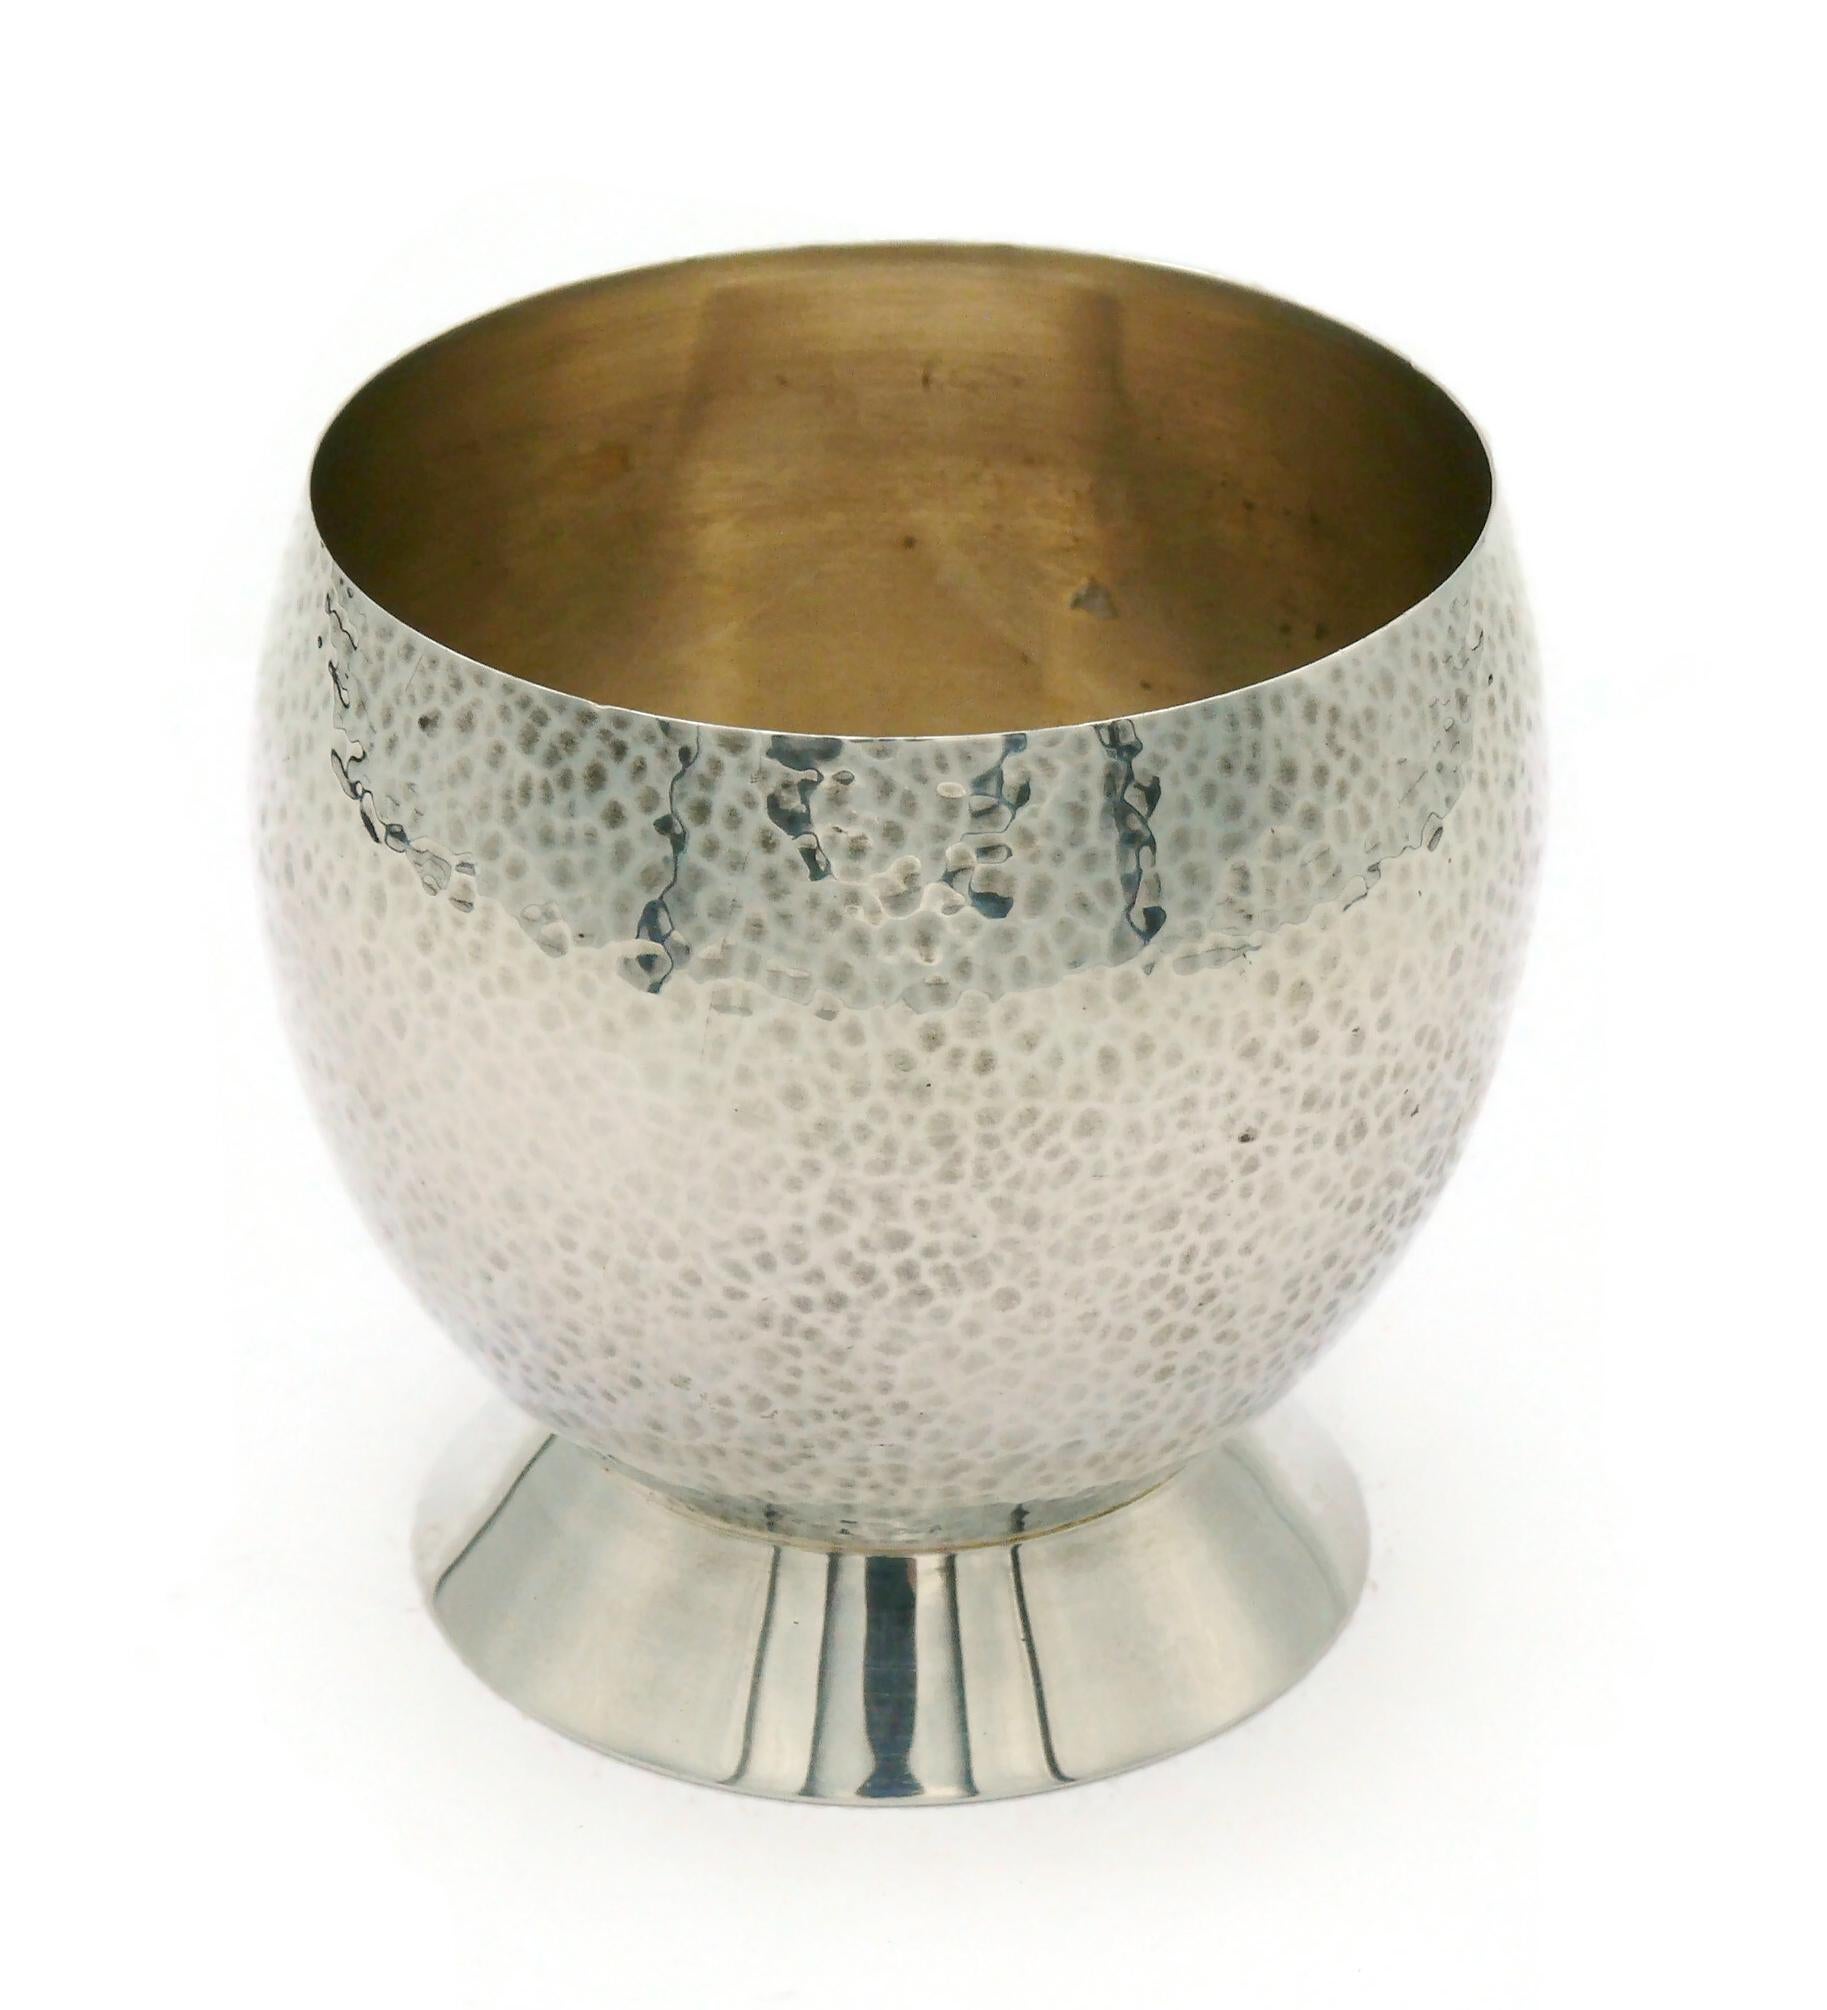 HERMES vintage silver plate small ball vase on pedestal featuring an hammered design.

Embossed HERMES PARIS Made in France.

Indicative measurements : height approx. 7 cm (2.76 inches) / diameter of the base approx. 5.6 cm (2.20 inches) / diameter